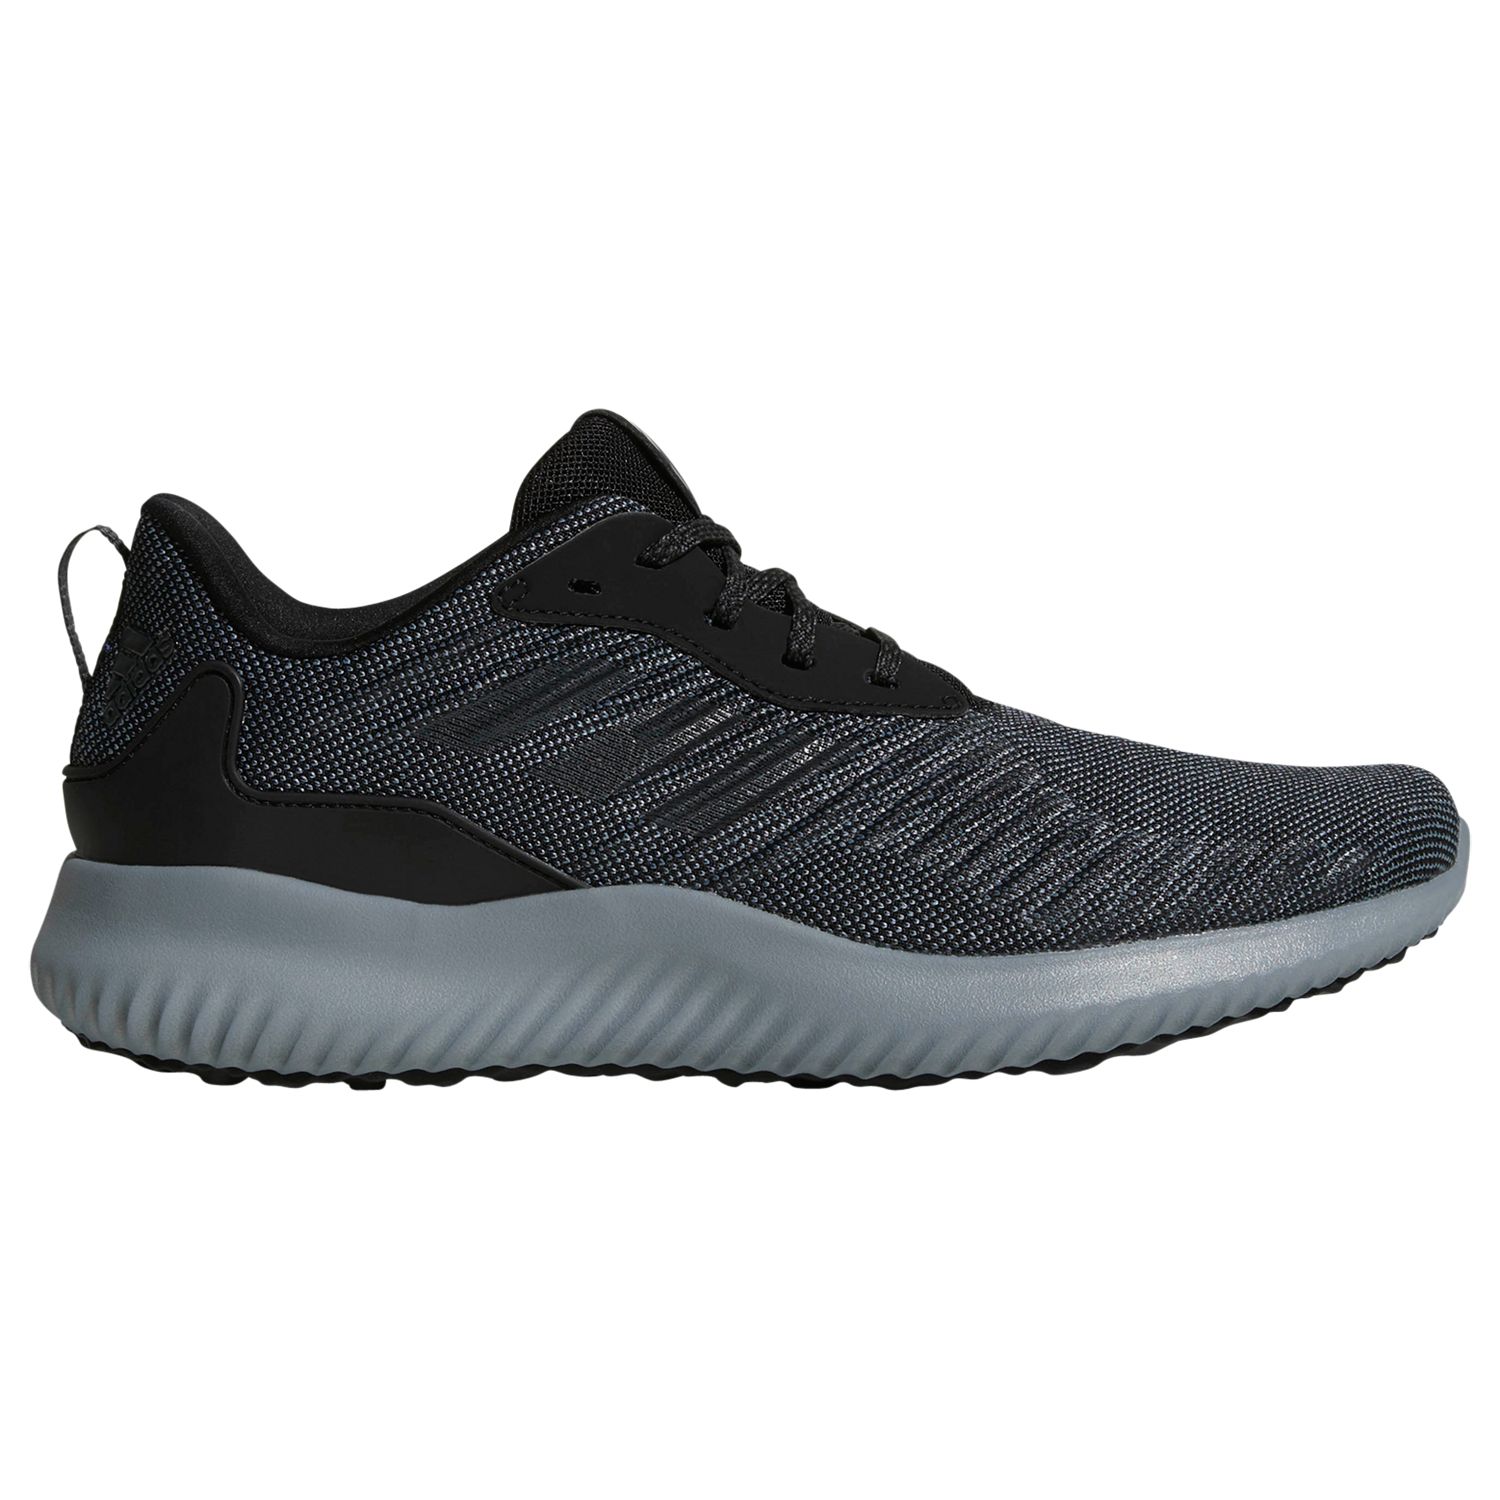 adidas Alphabounce RC Men's Running Shoes, Black, 7